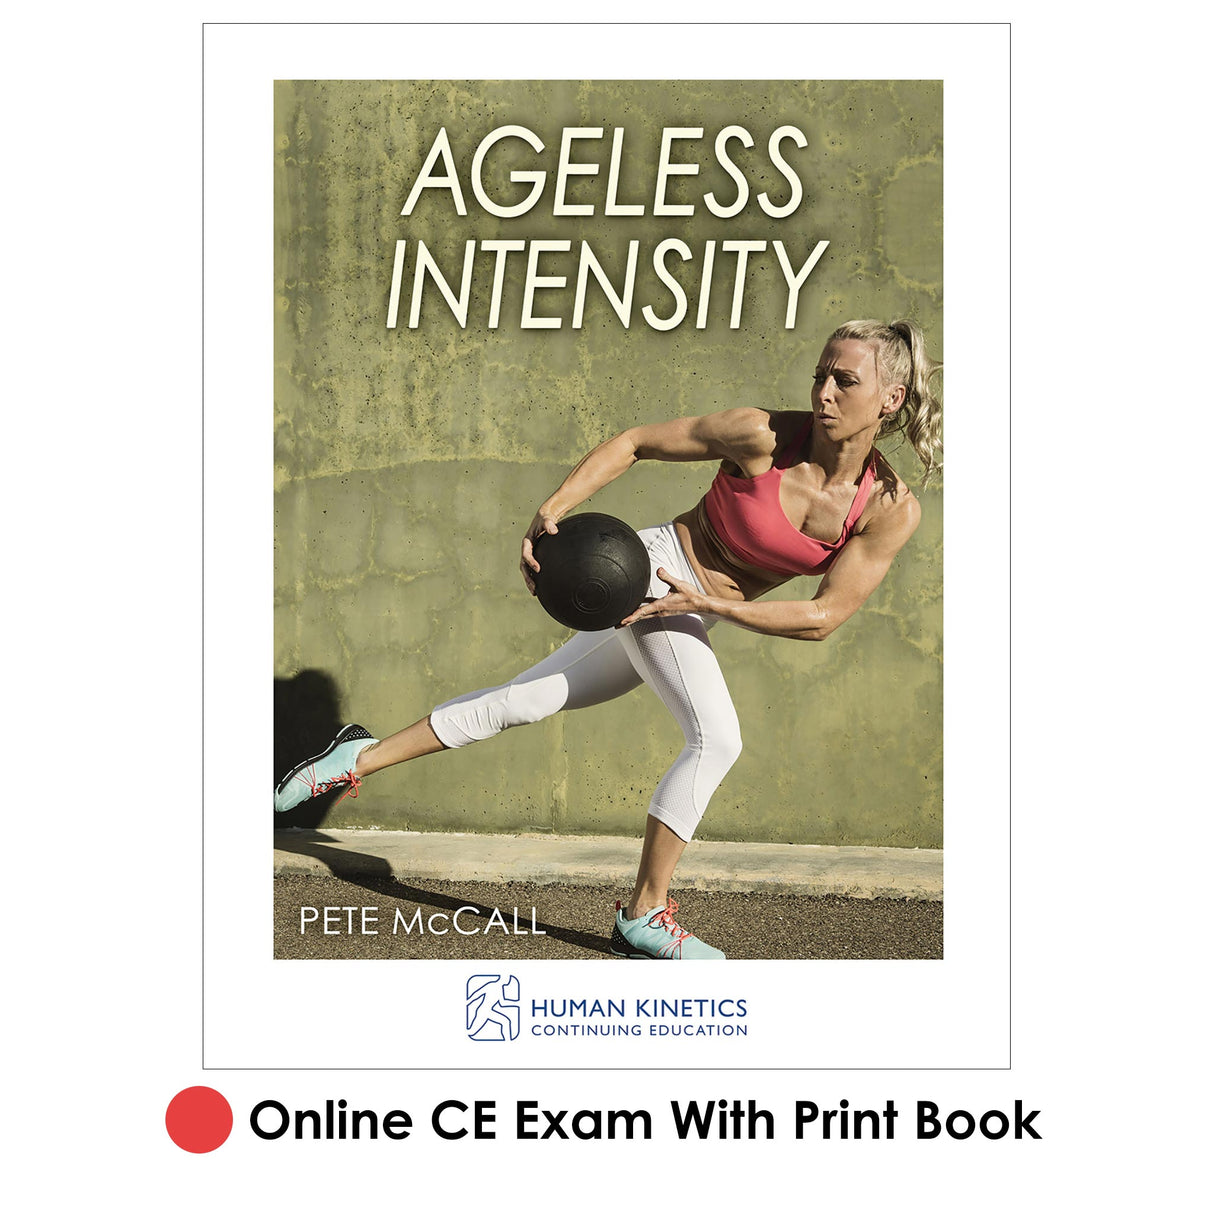 Ageless Intensity Online CE Exam With Print Book